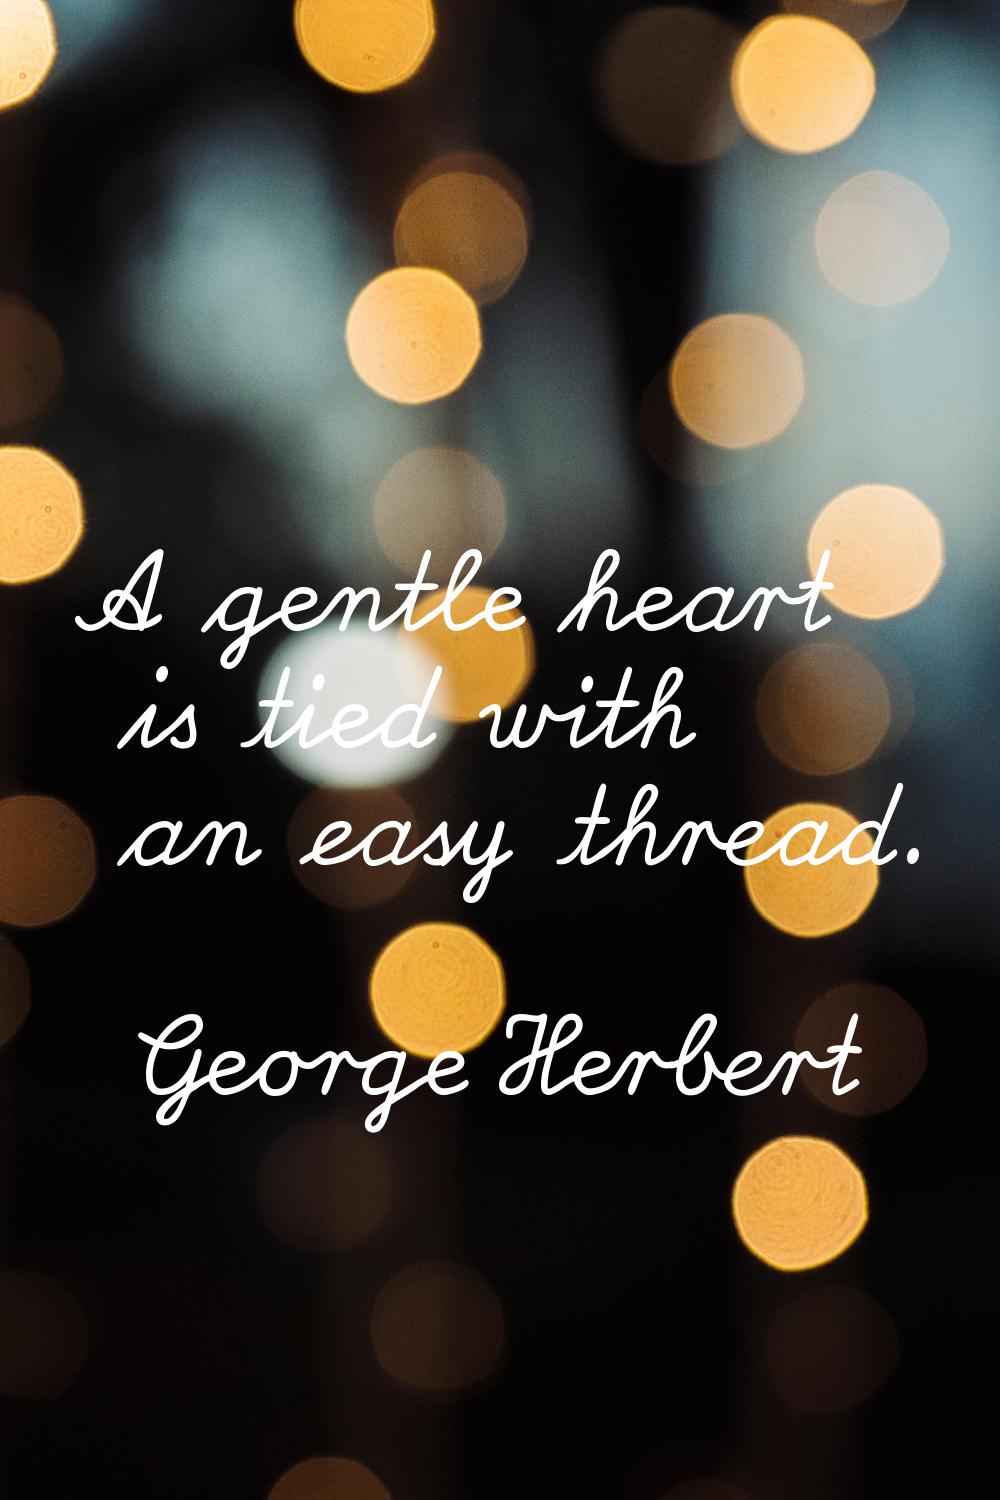 A gentle heart is tied with an easy thread.